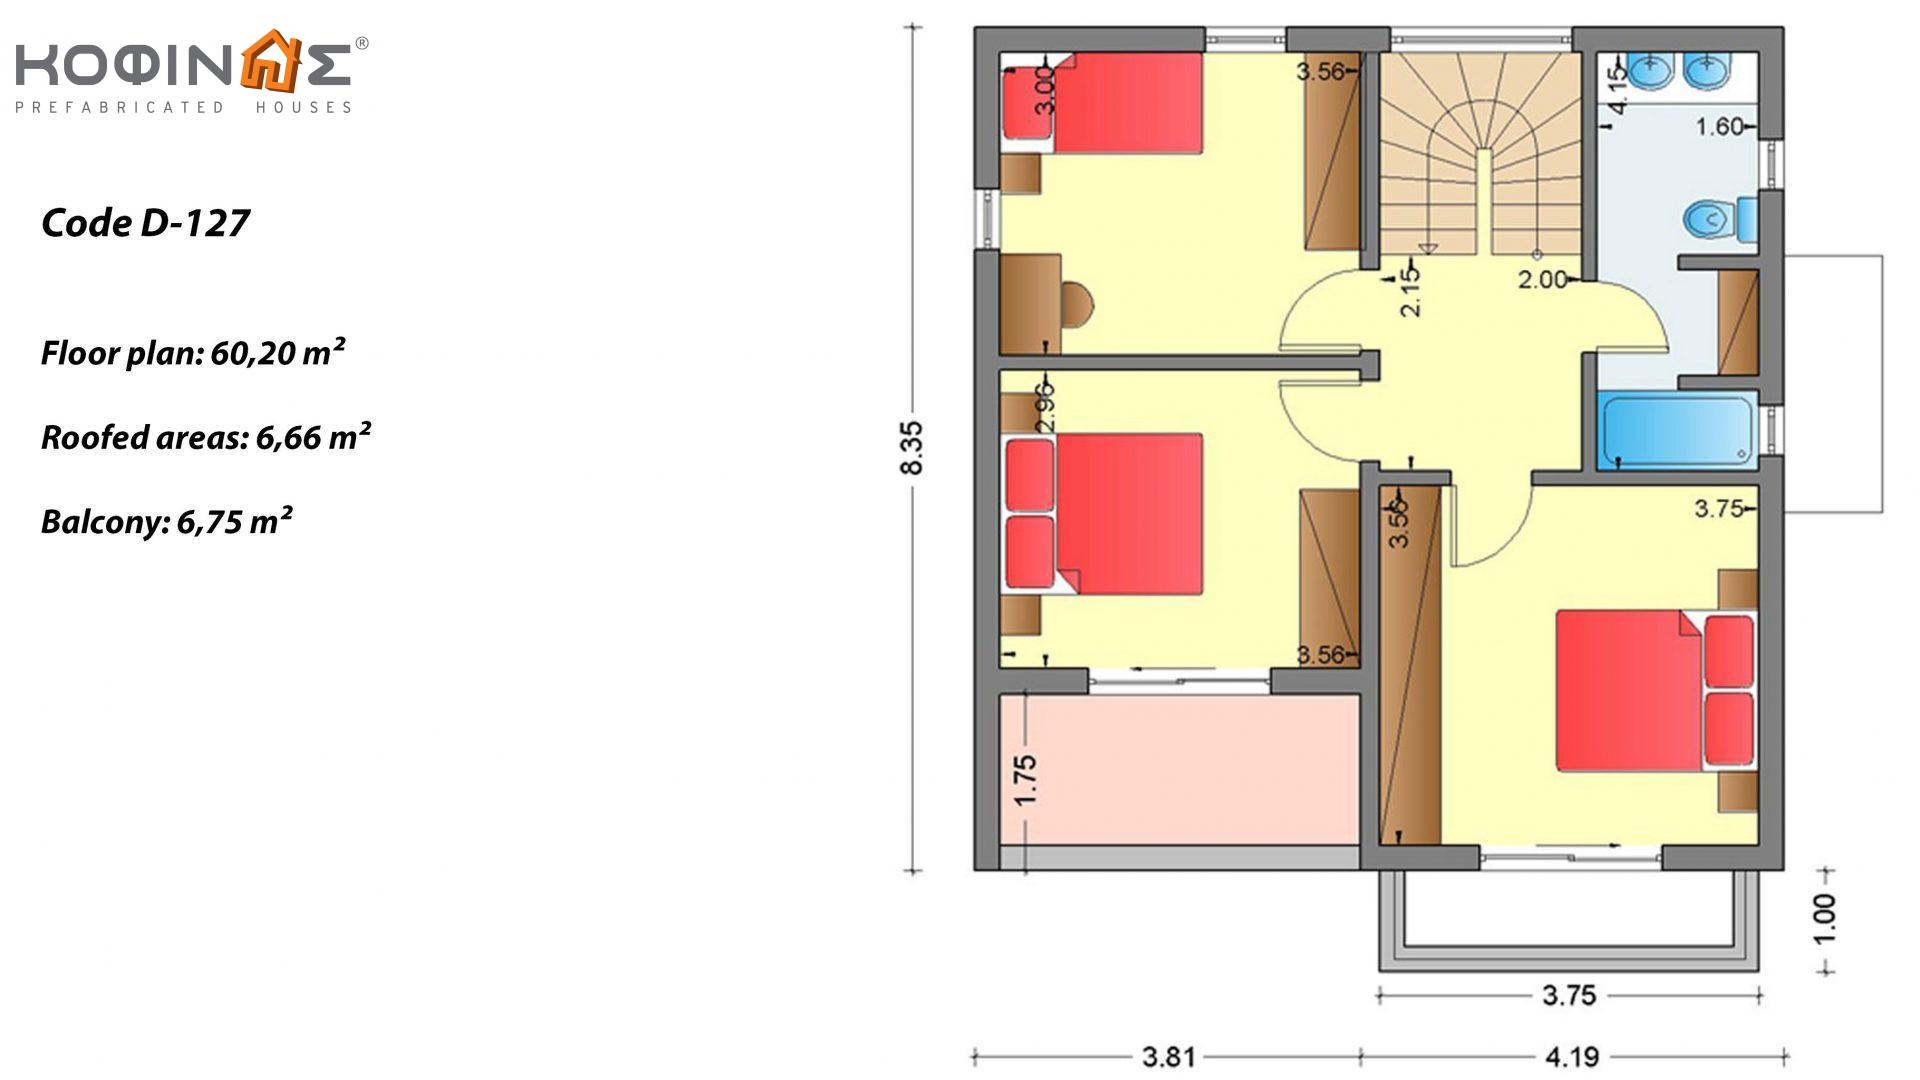 2-story house D-127, total surface of 127,00 m² ,covered roofed areas 12,86 m²,balconies 6,75 m²